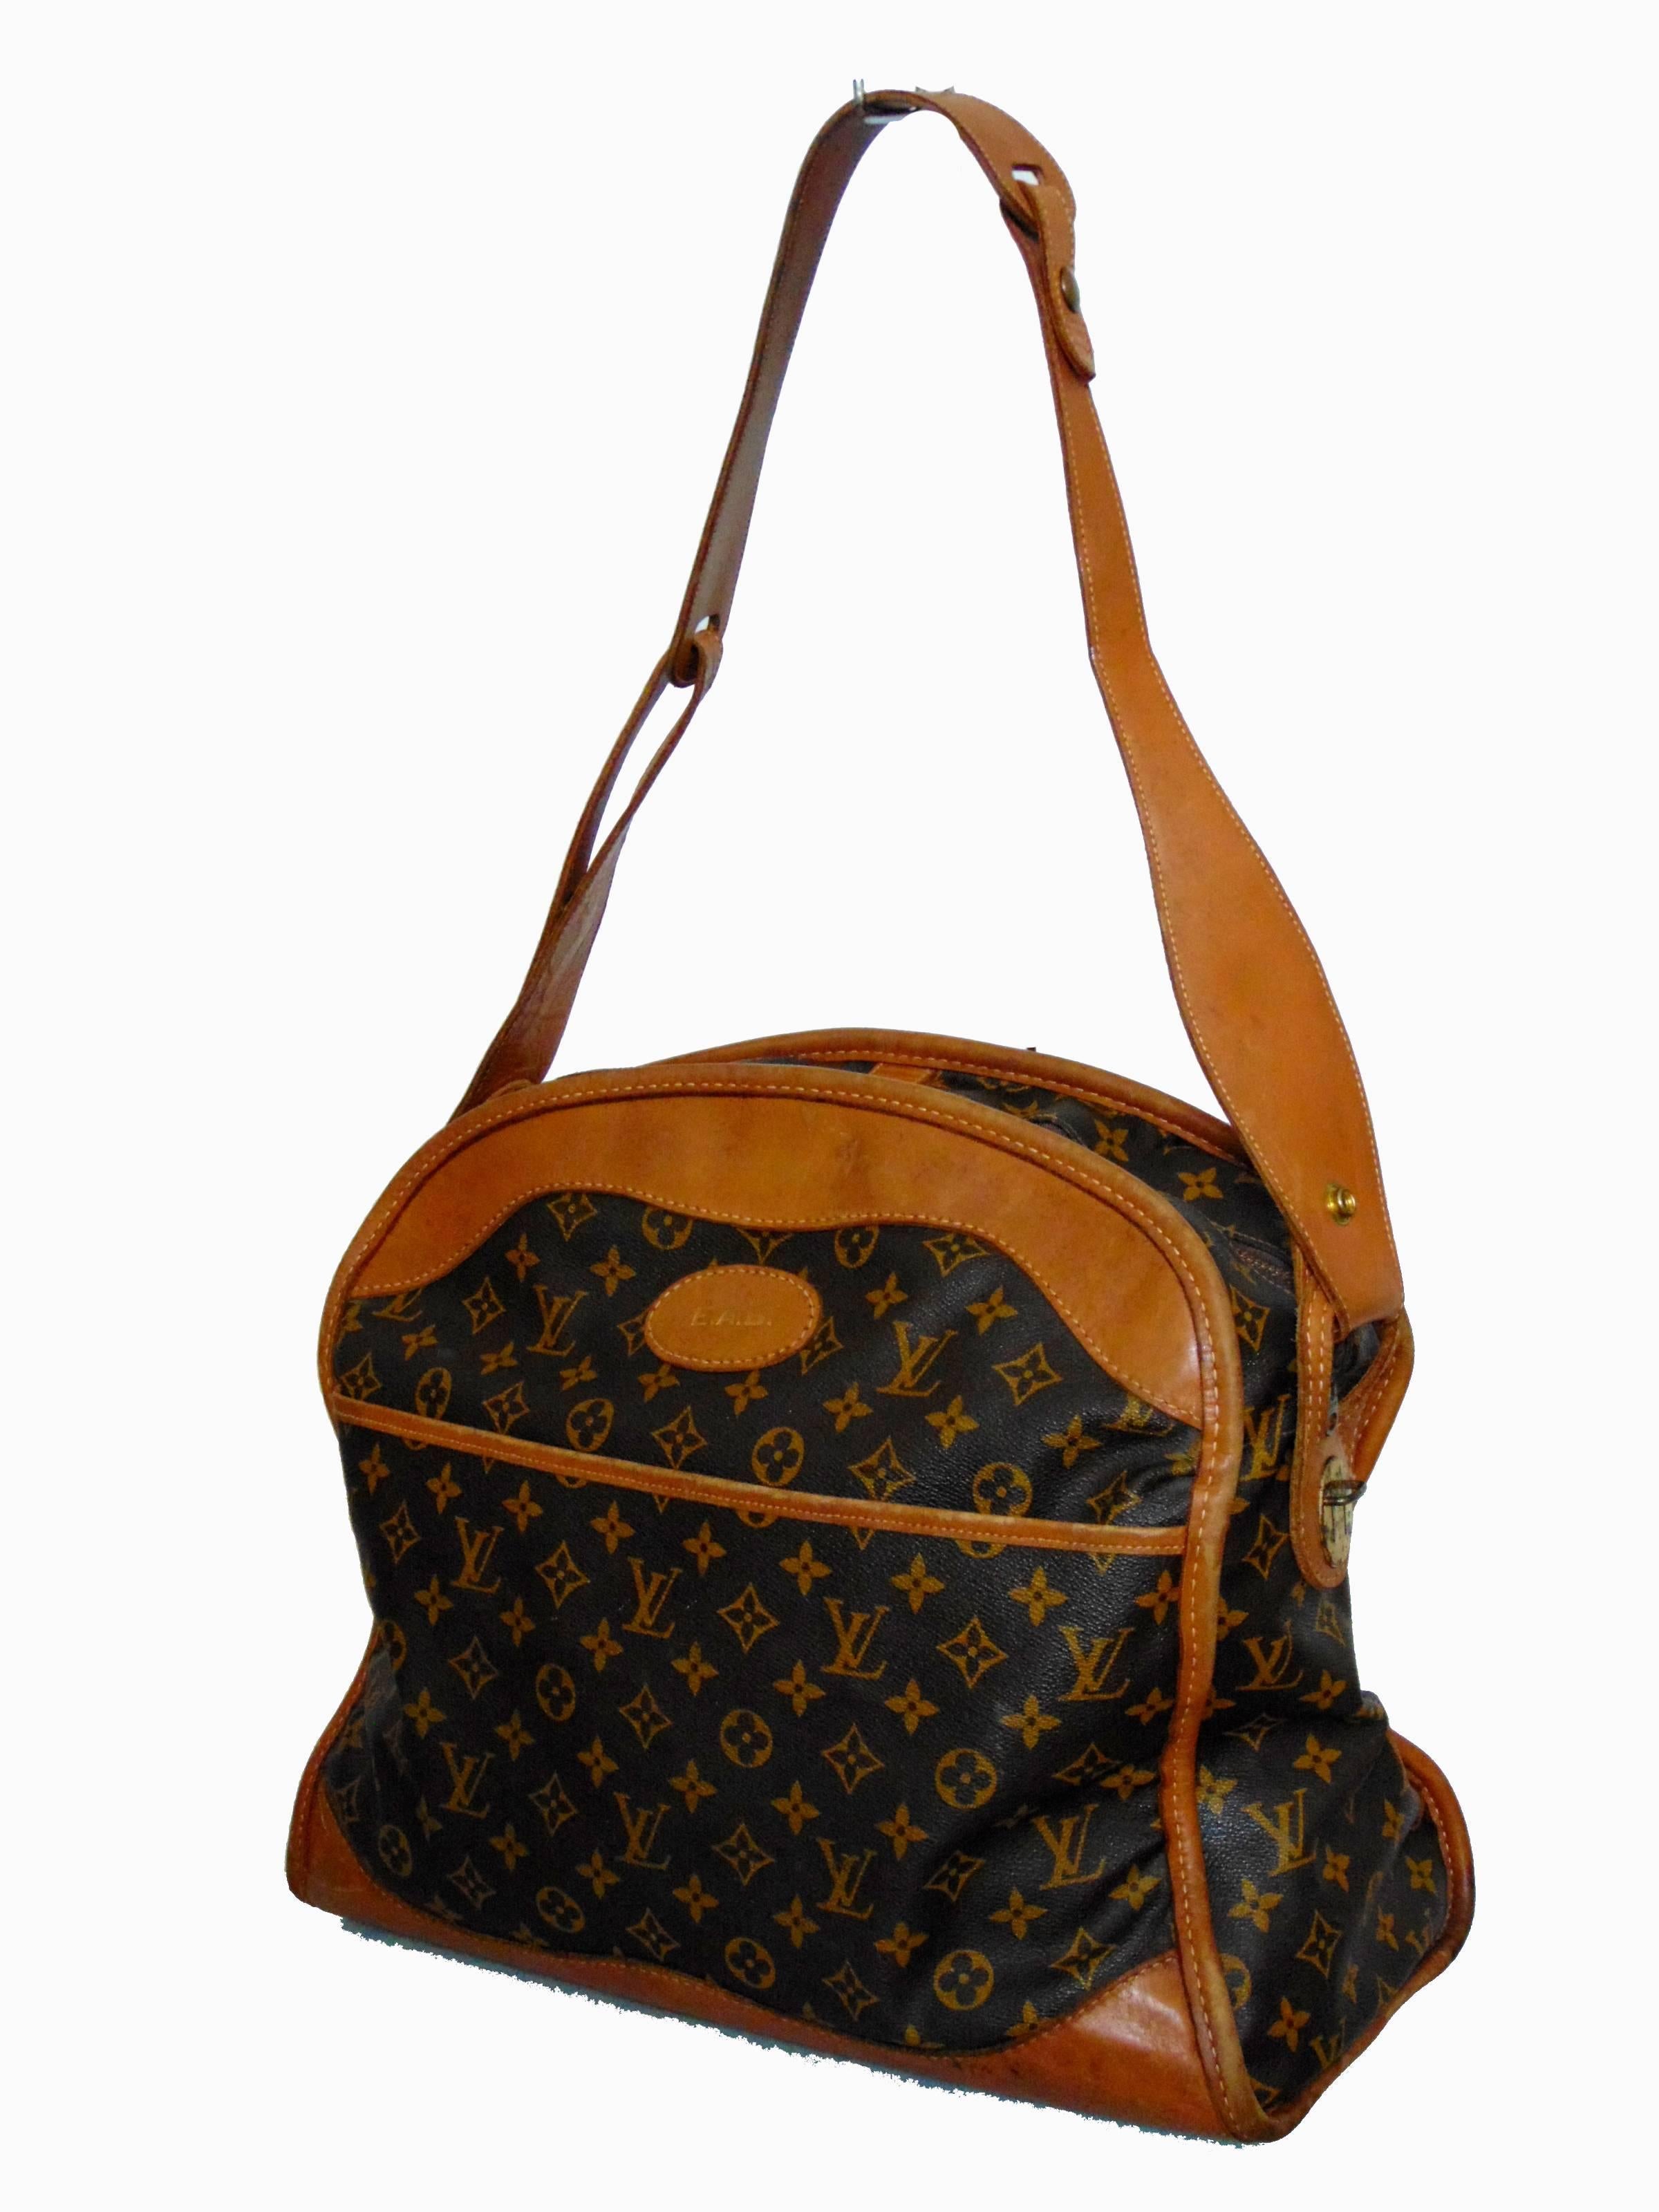 This vintage travel bag was made in the USA by The French Company under special license from Louis Vuitton, likely in the mid 1970s.  Made from Vuitton's signature monogram canvas, this piece is trimmed in tan leather.  It features an open front